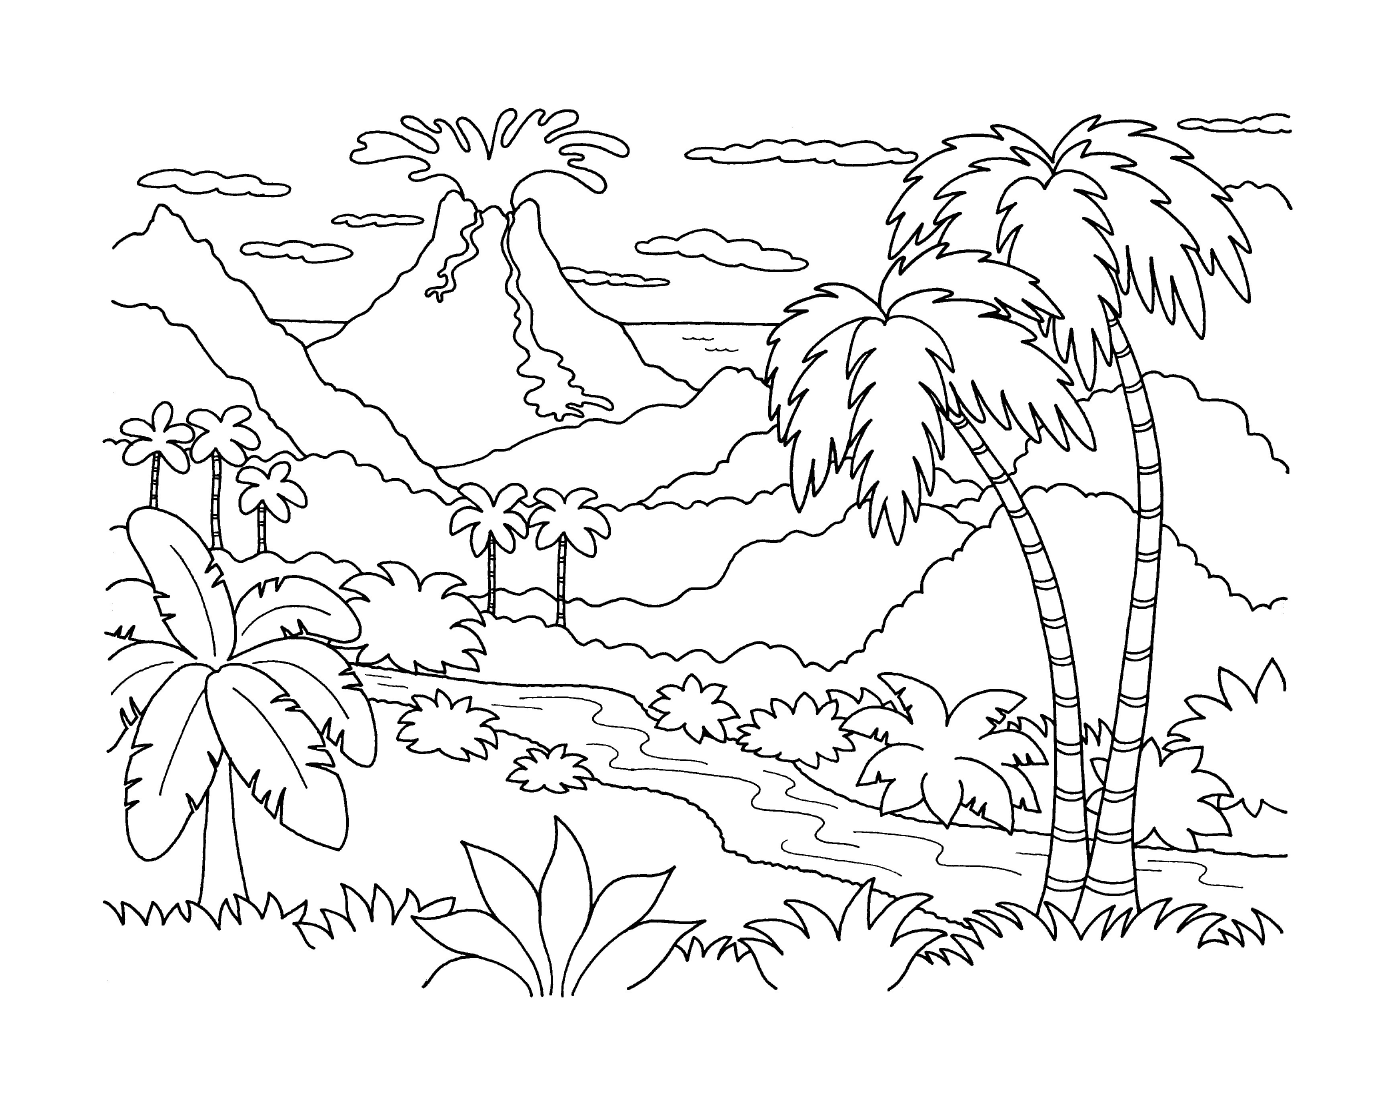  A landscape with a volcano 